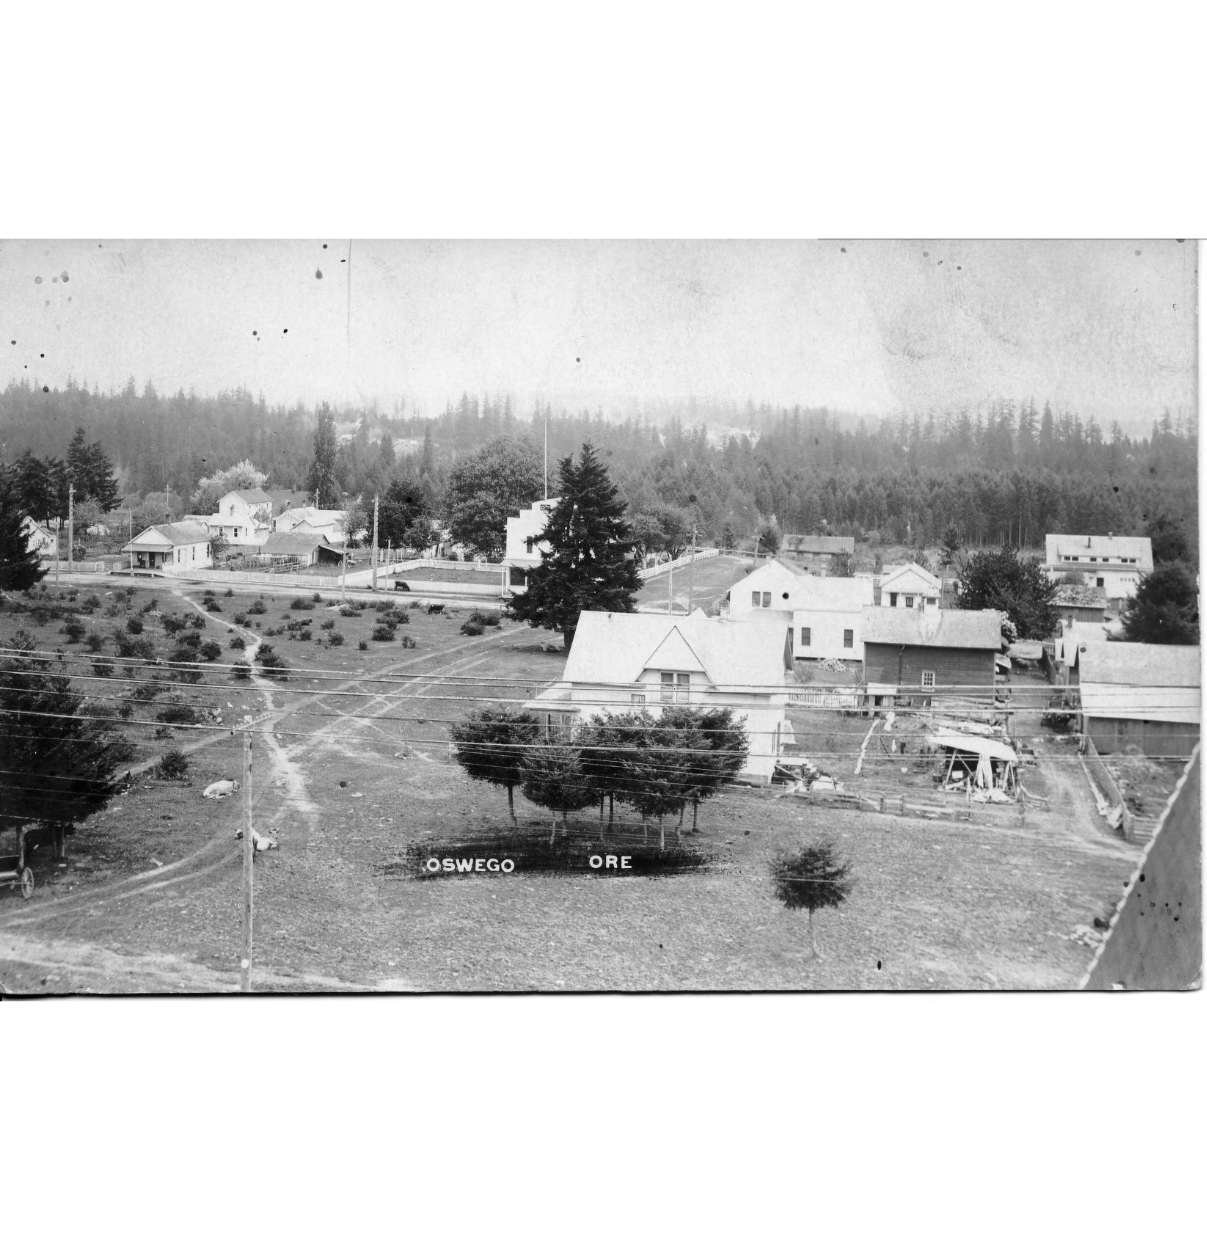 1908 photograph of old town Oswego, which has a few (mostly white) buildings amid a field and trees.